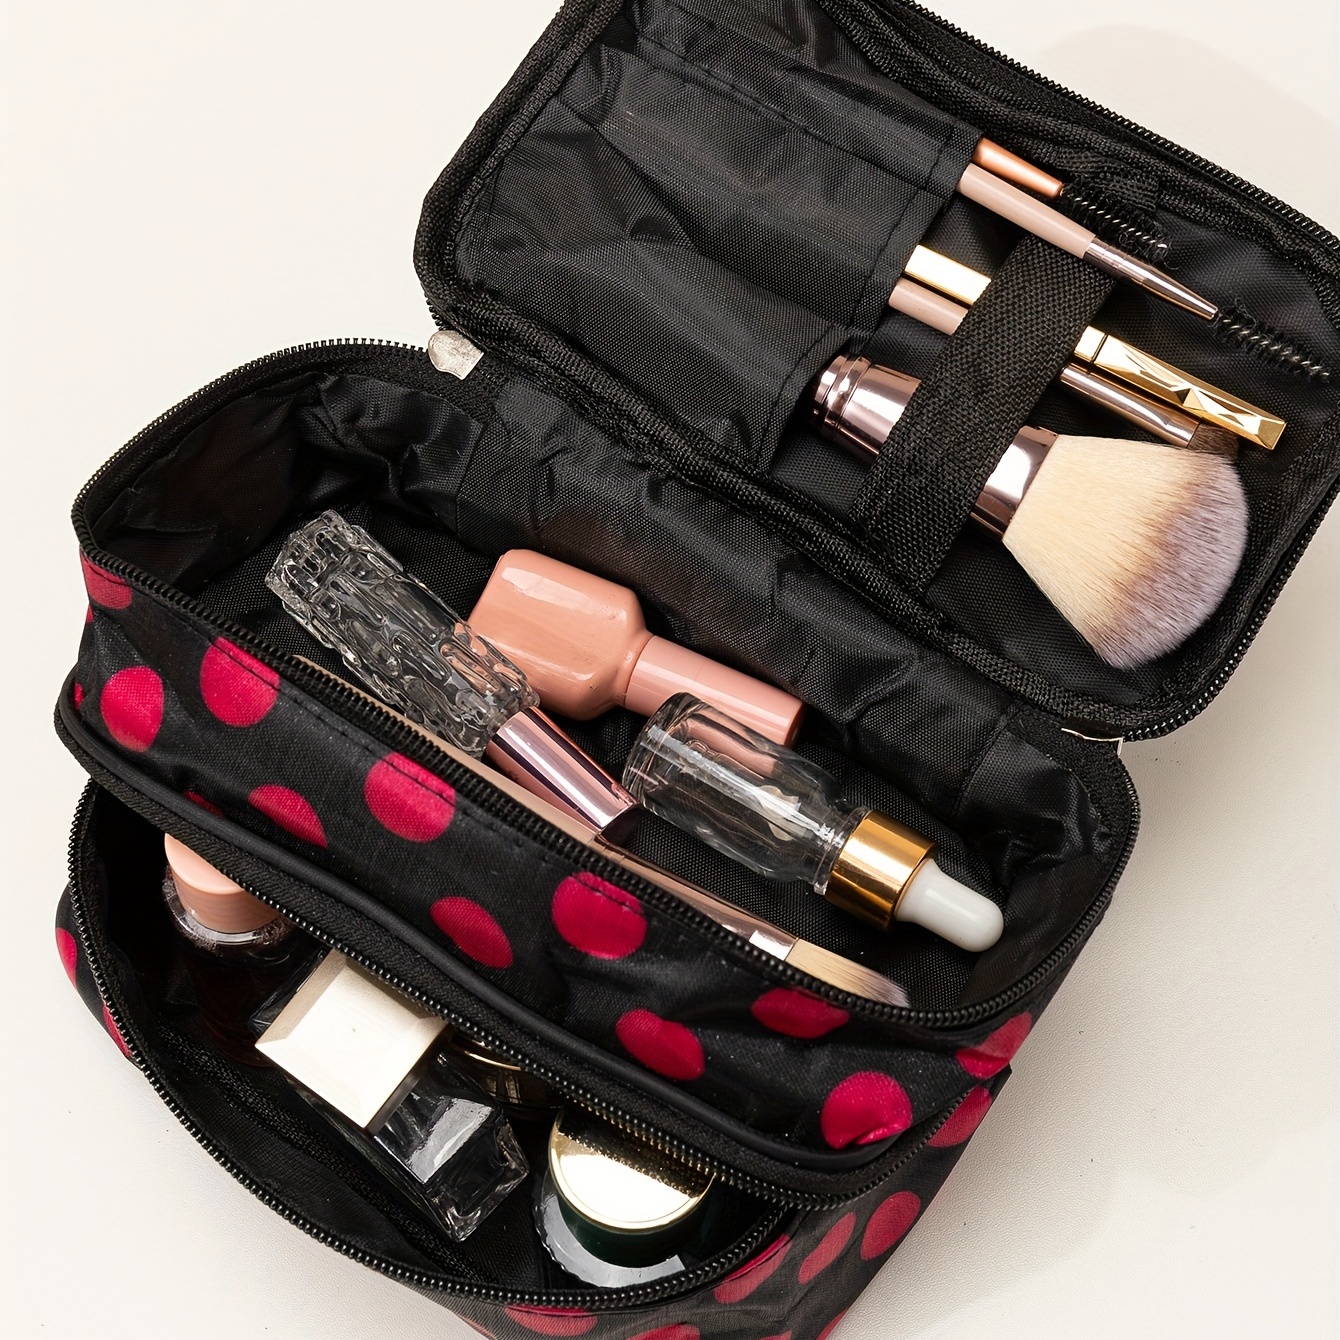 COSMETIC TRAVEL BAG – FACTORY VIBES